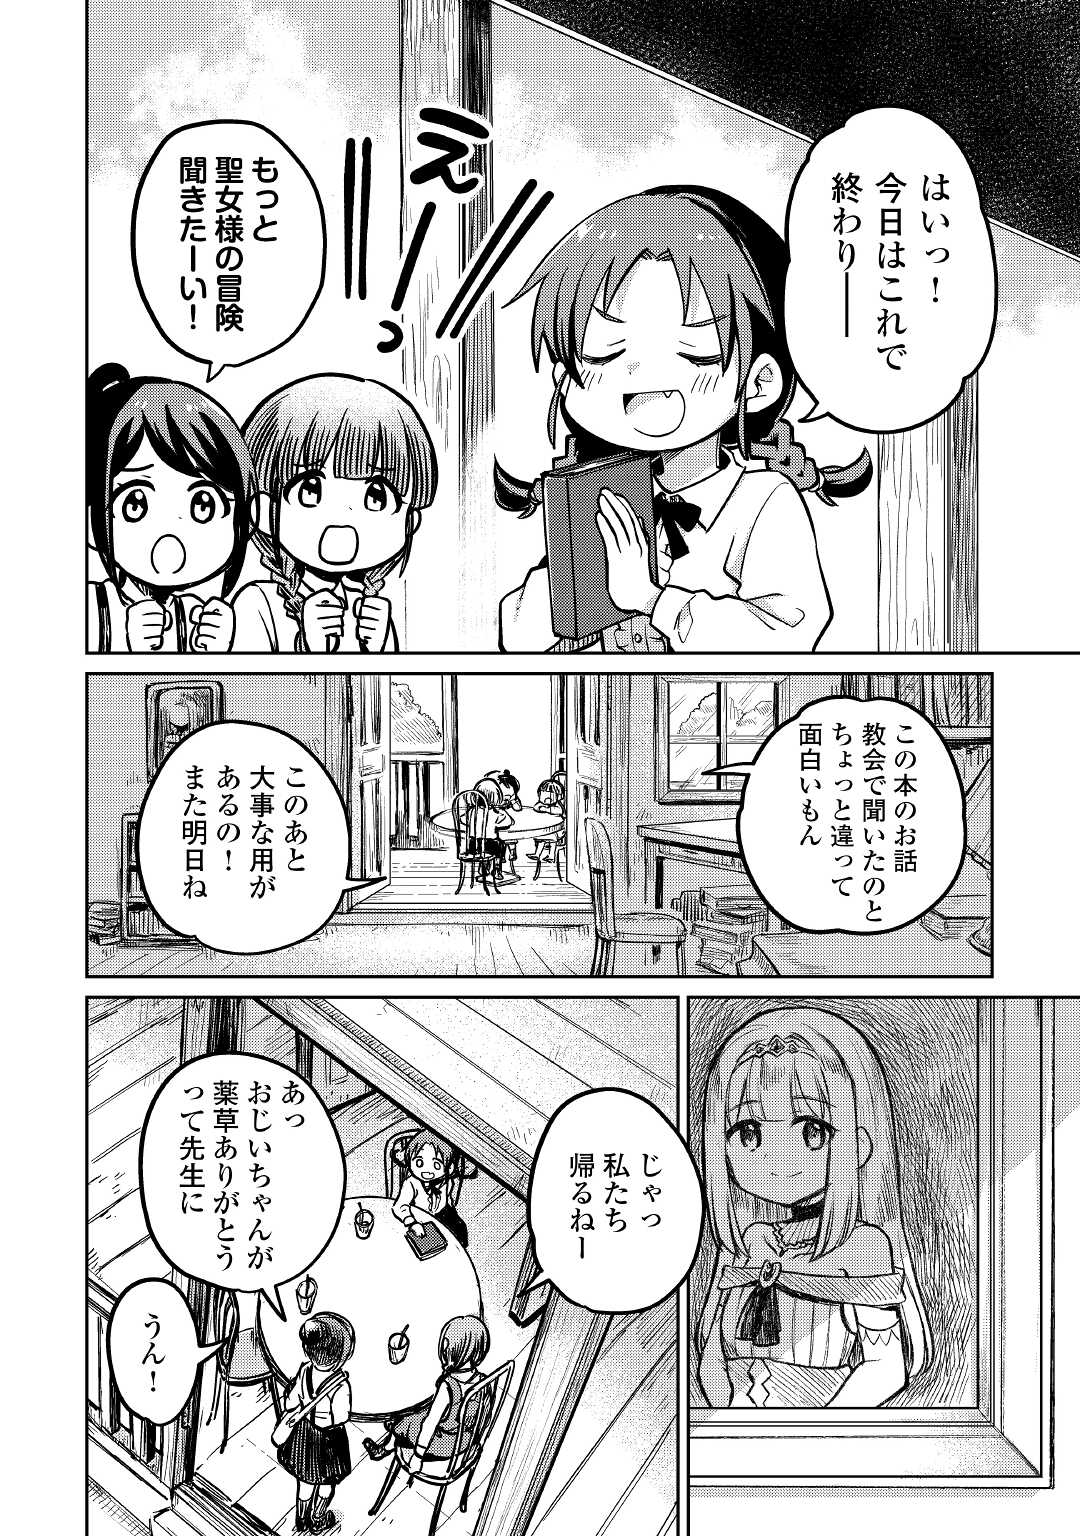 The Former Structural Researcher’s Story of Otherworldly Adventure 第42話 - Page 28